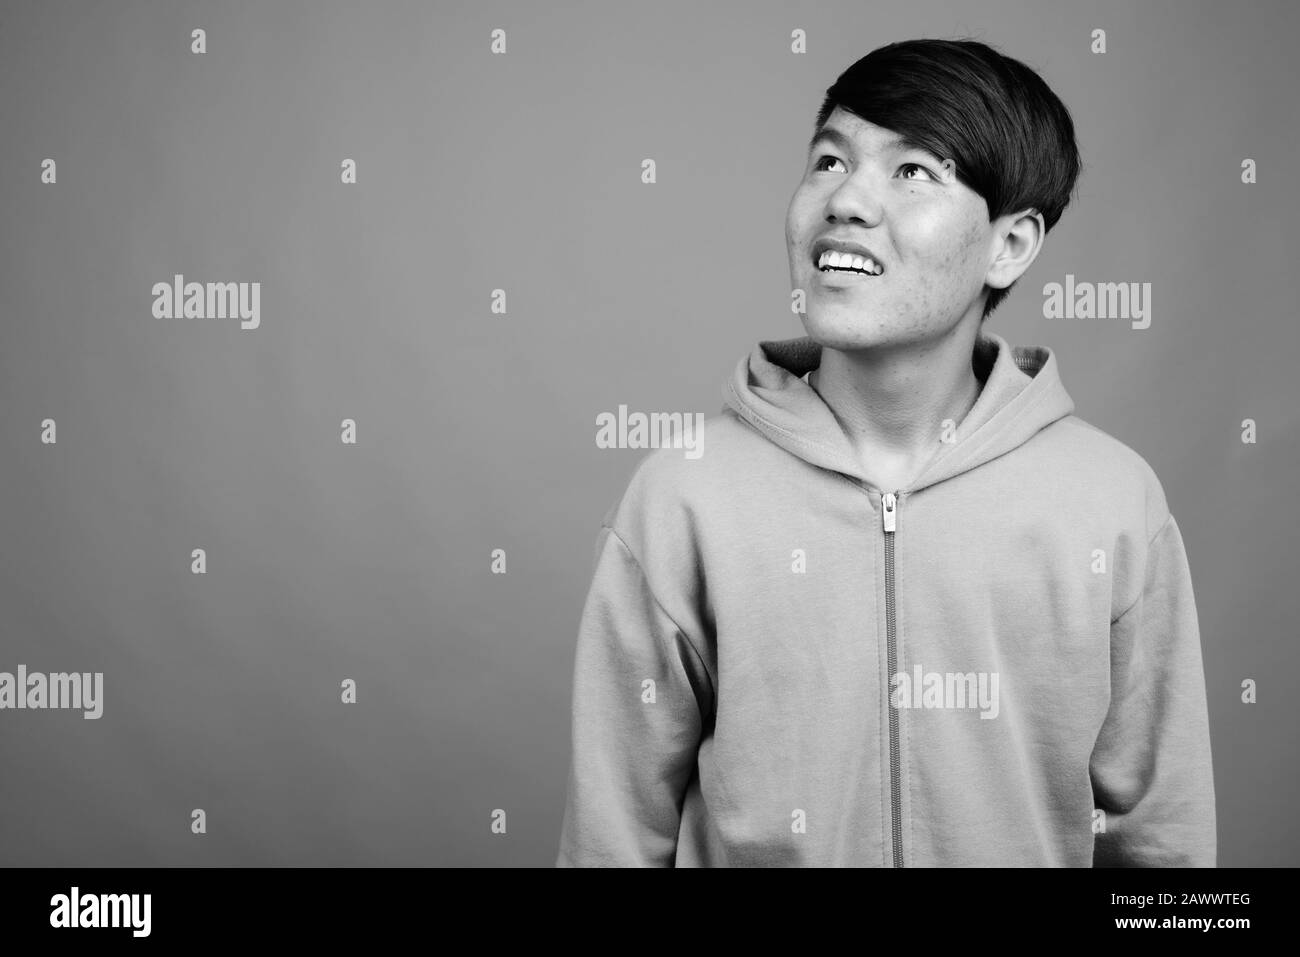 Young Asian teenage boy wearing hoodie against gray background Stock Photo